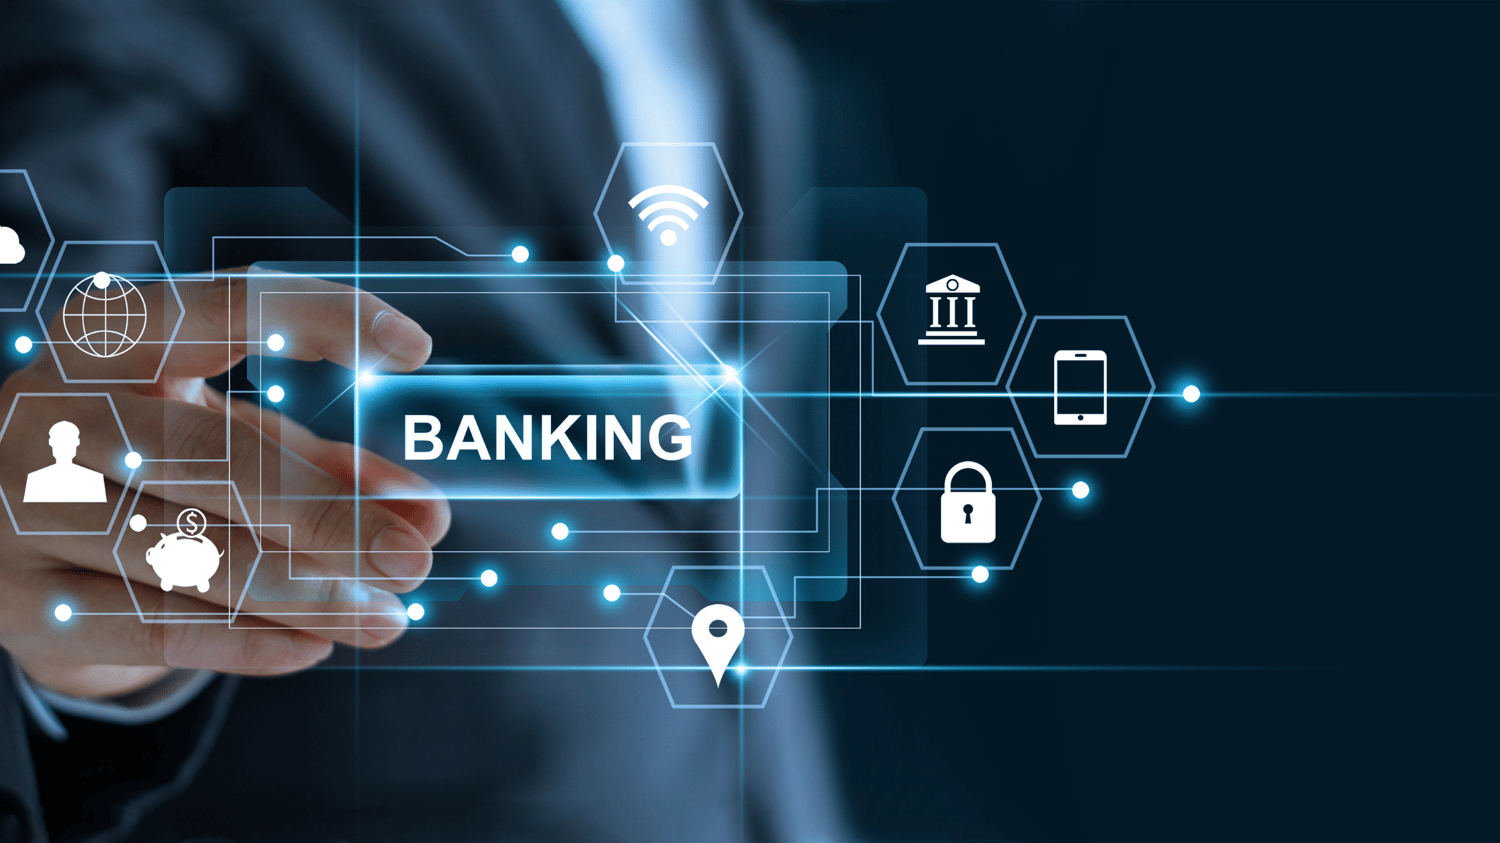 INFINITE BANKING VS TRADITIONAL BANKING: WHAT’S THE DIFFERENCE?